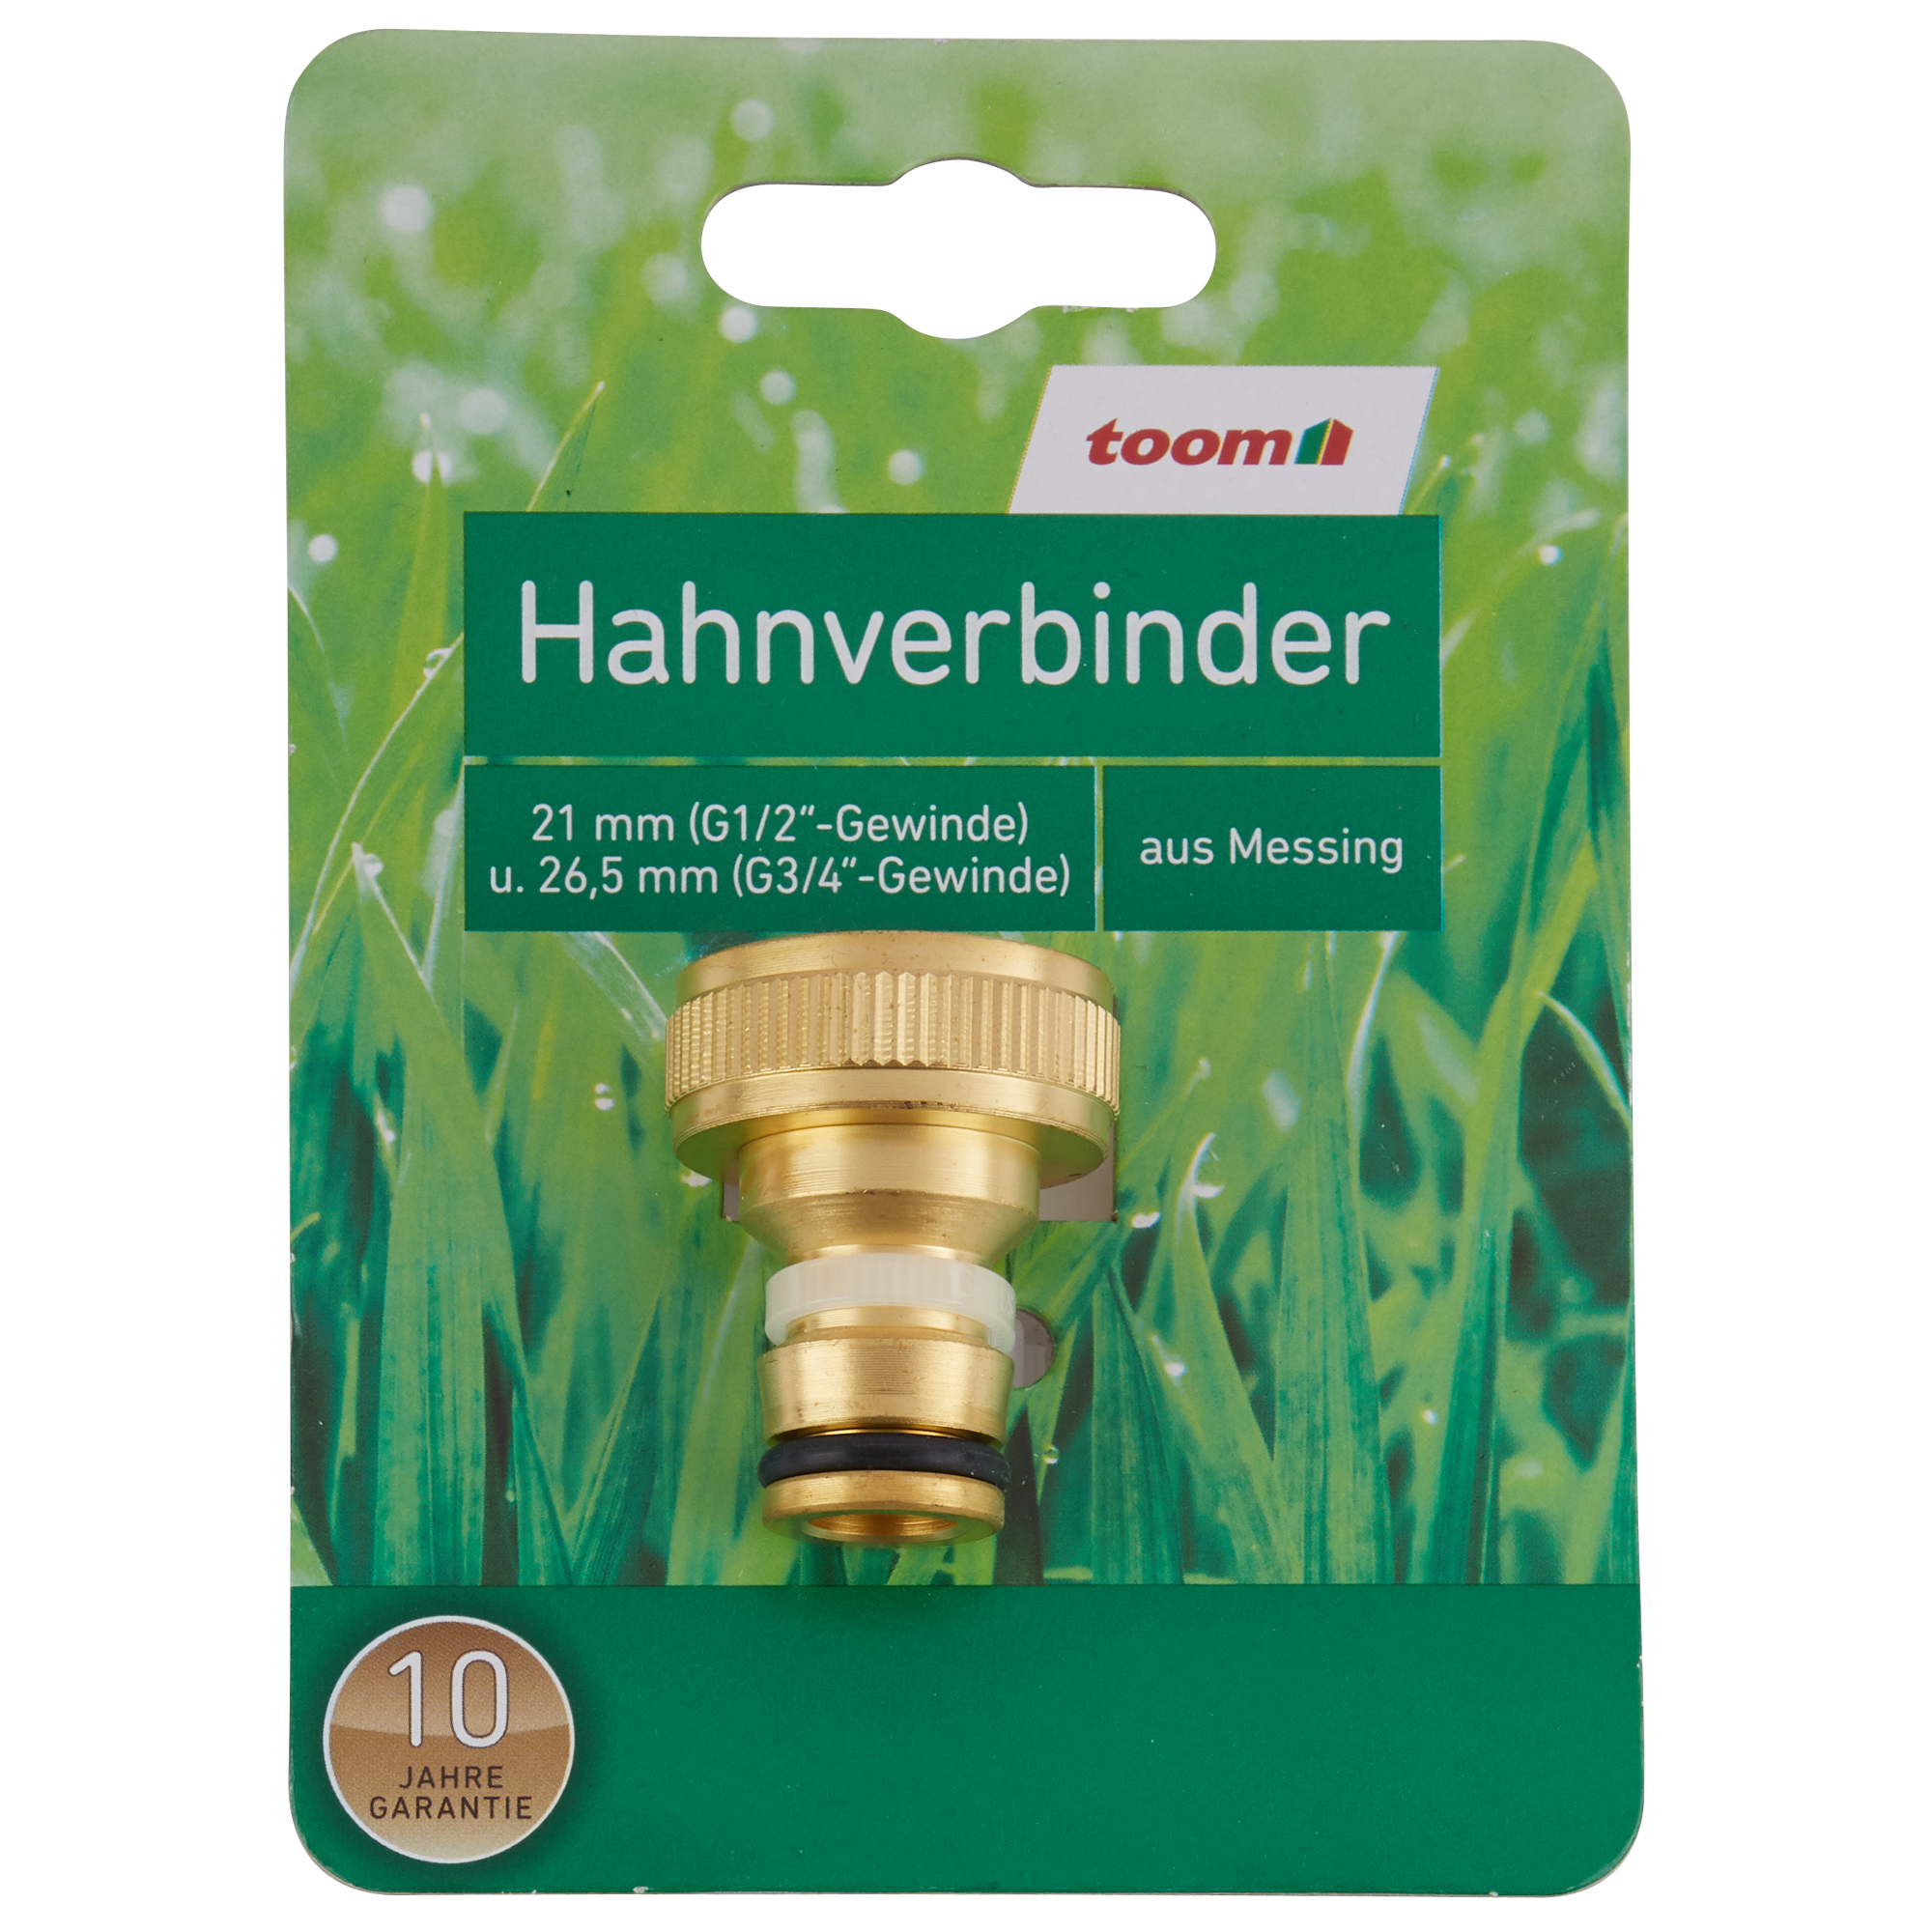 Hahnverbinder G1/2" und G3/4" + product picture